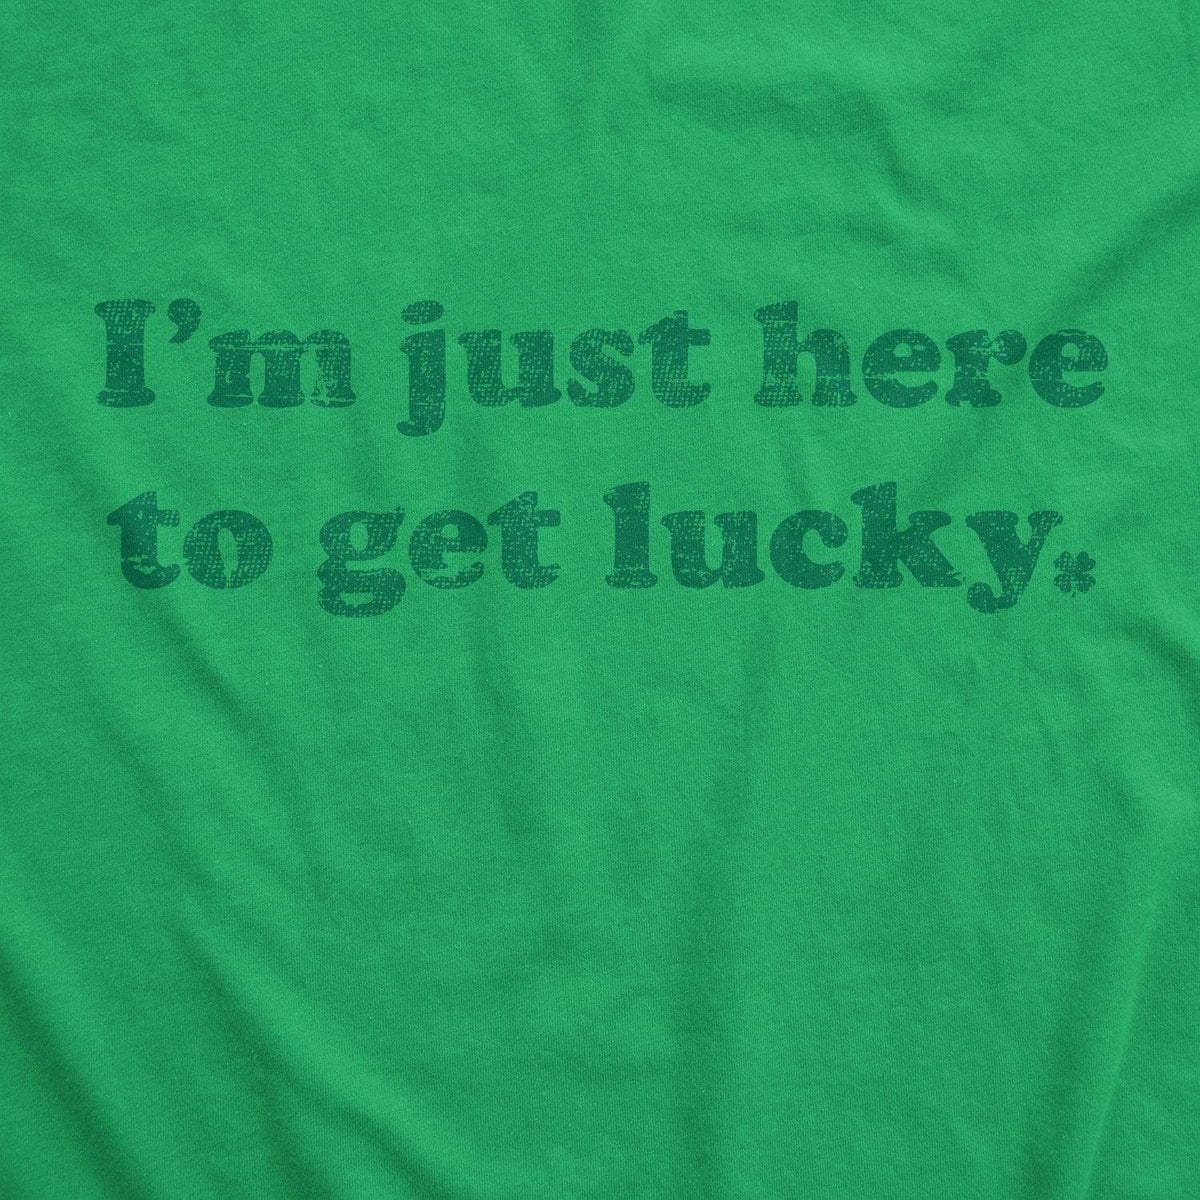 I&#39;m Just Here To Get Lucky Women&#39;s Tshirt  -  Crazy Dog T-Shirts